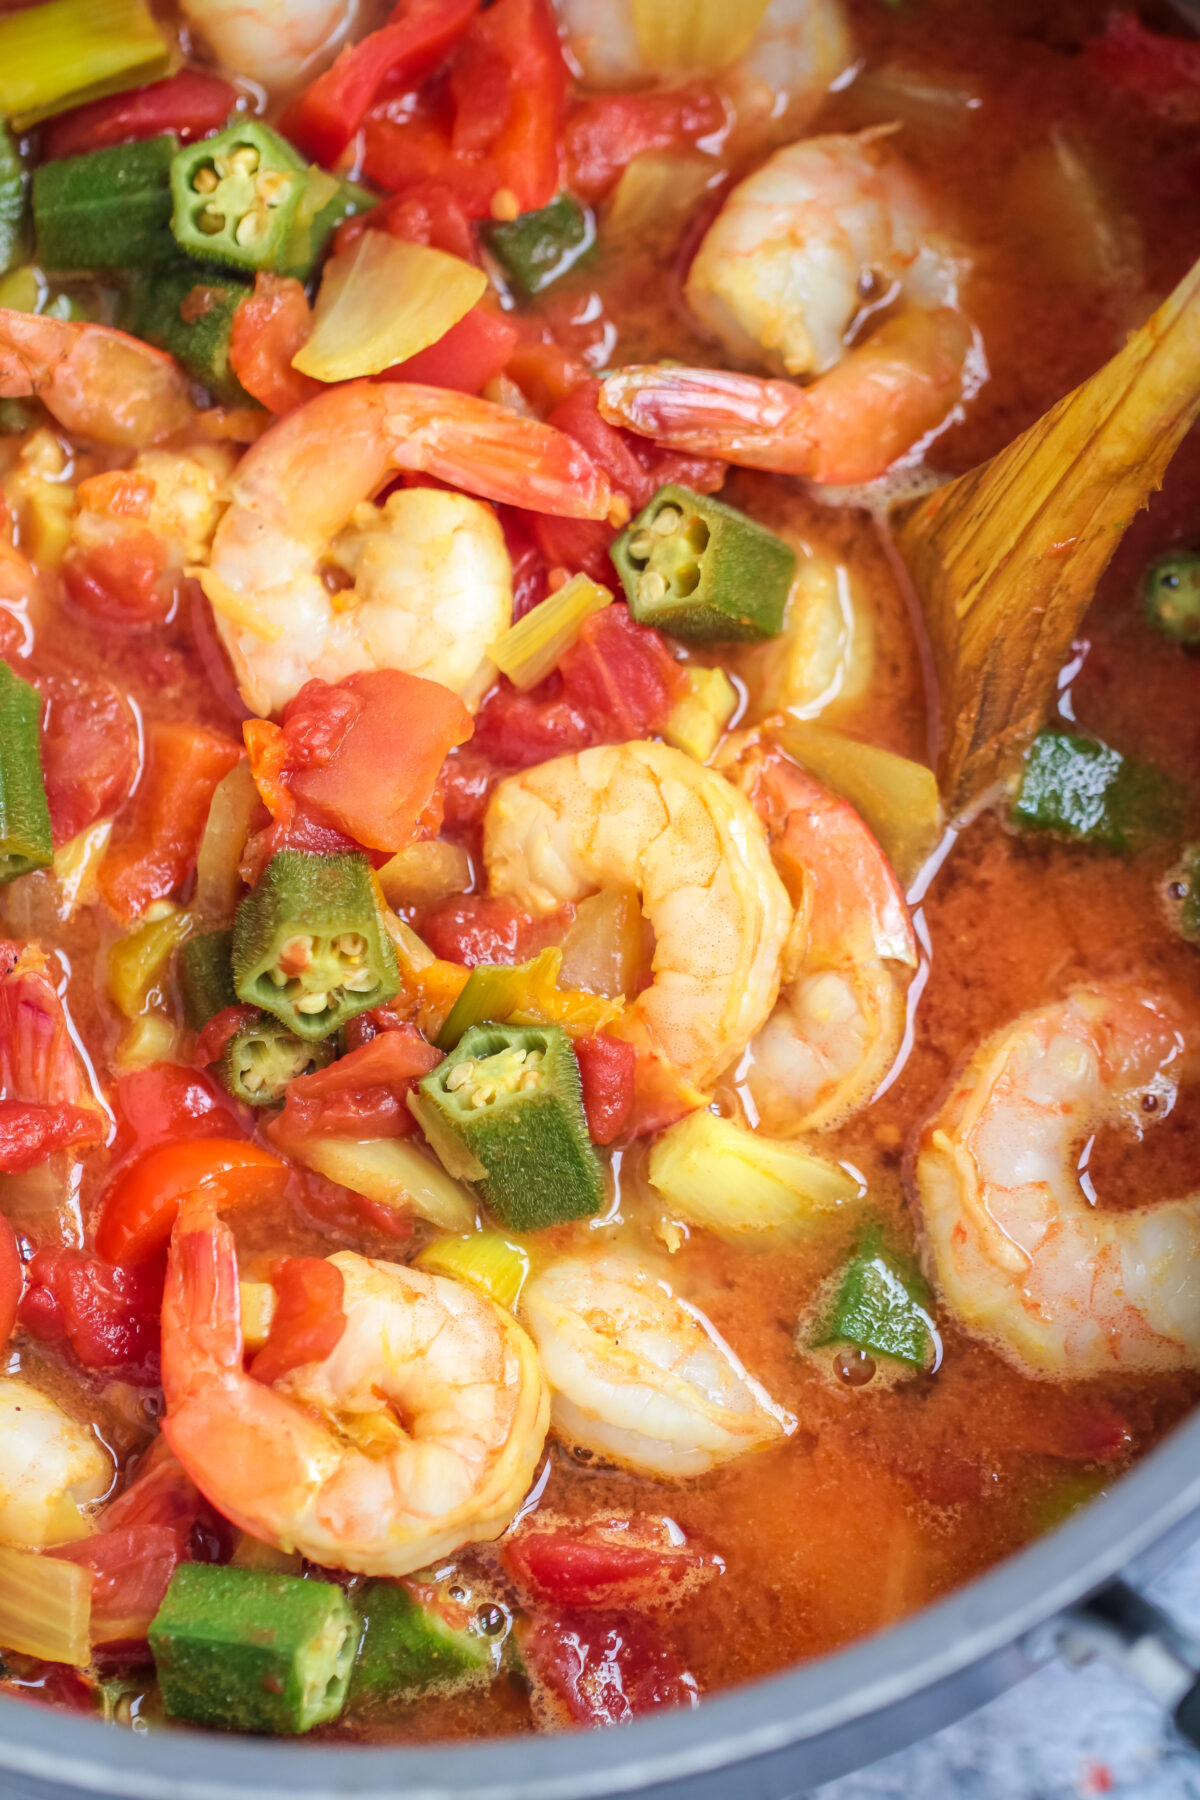 This Caribbean Okra and Shrimp recipe is a simple, spicy, and flavourful stew featuring plump shrimp, crisp okra and scotch bonnet peppers.